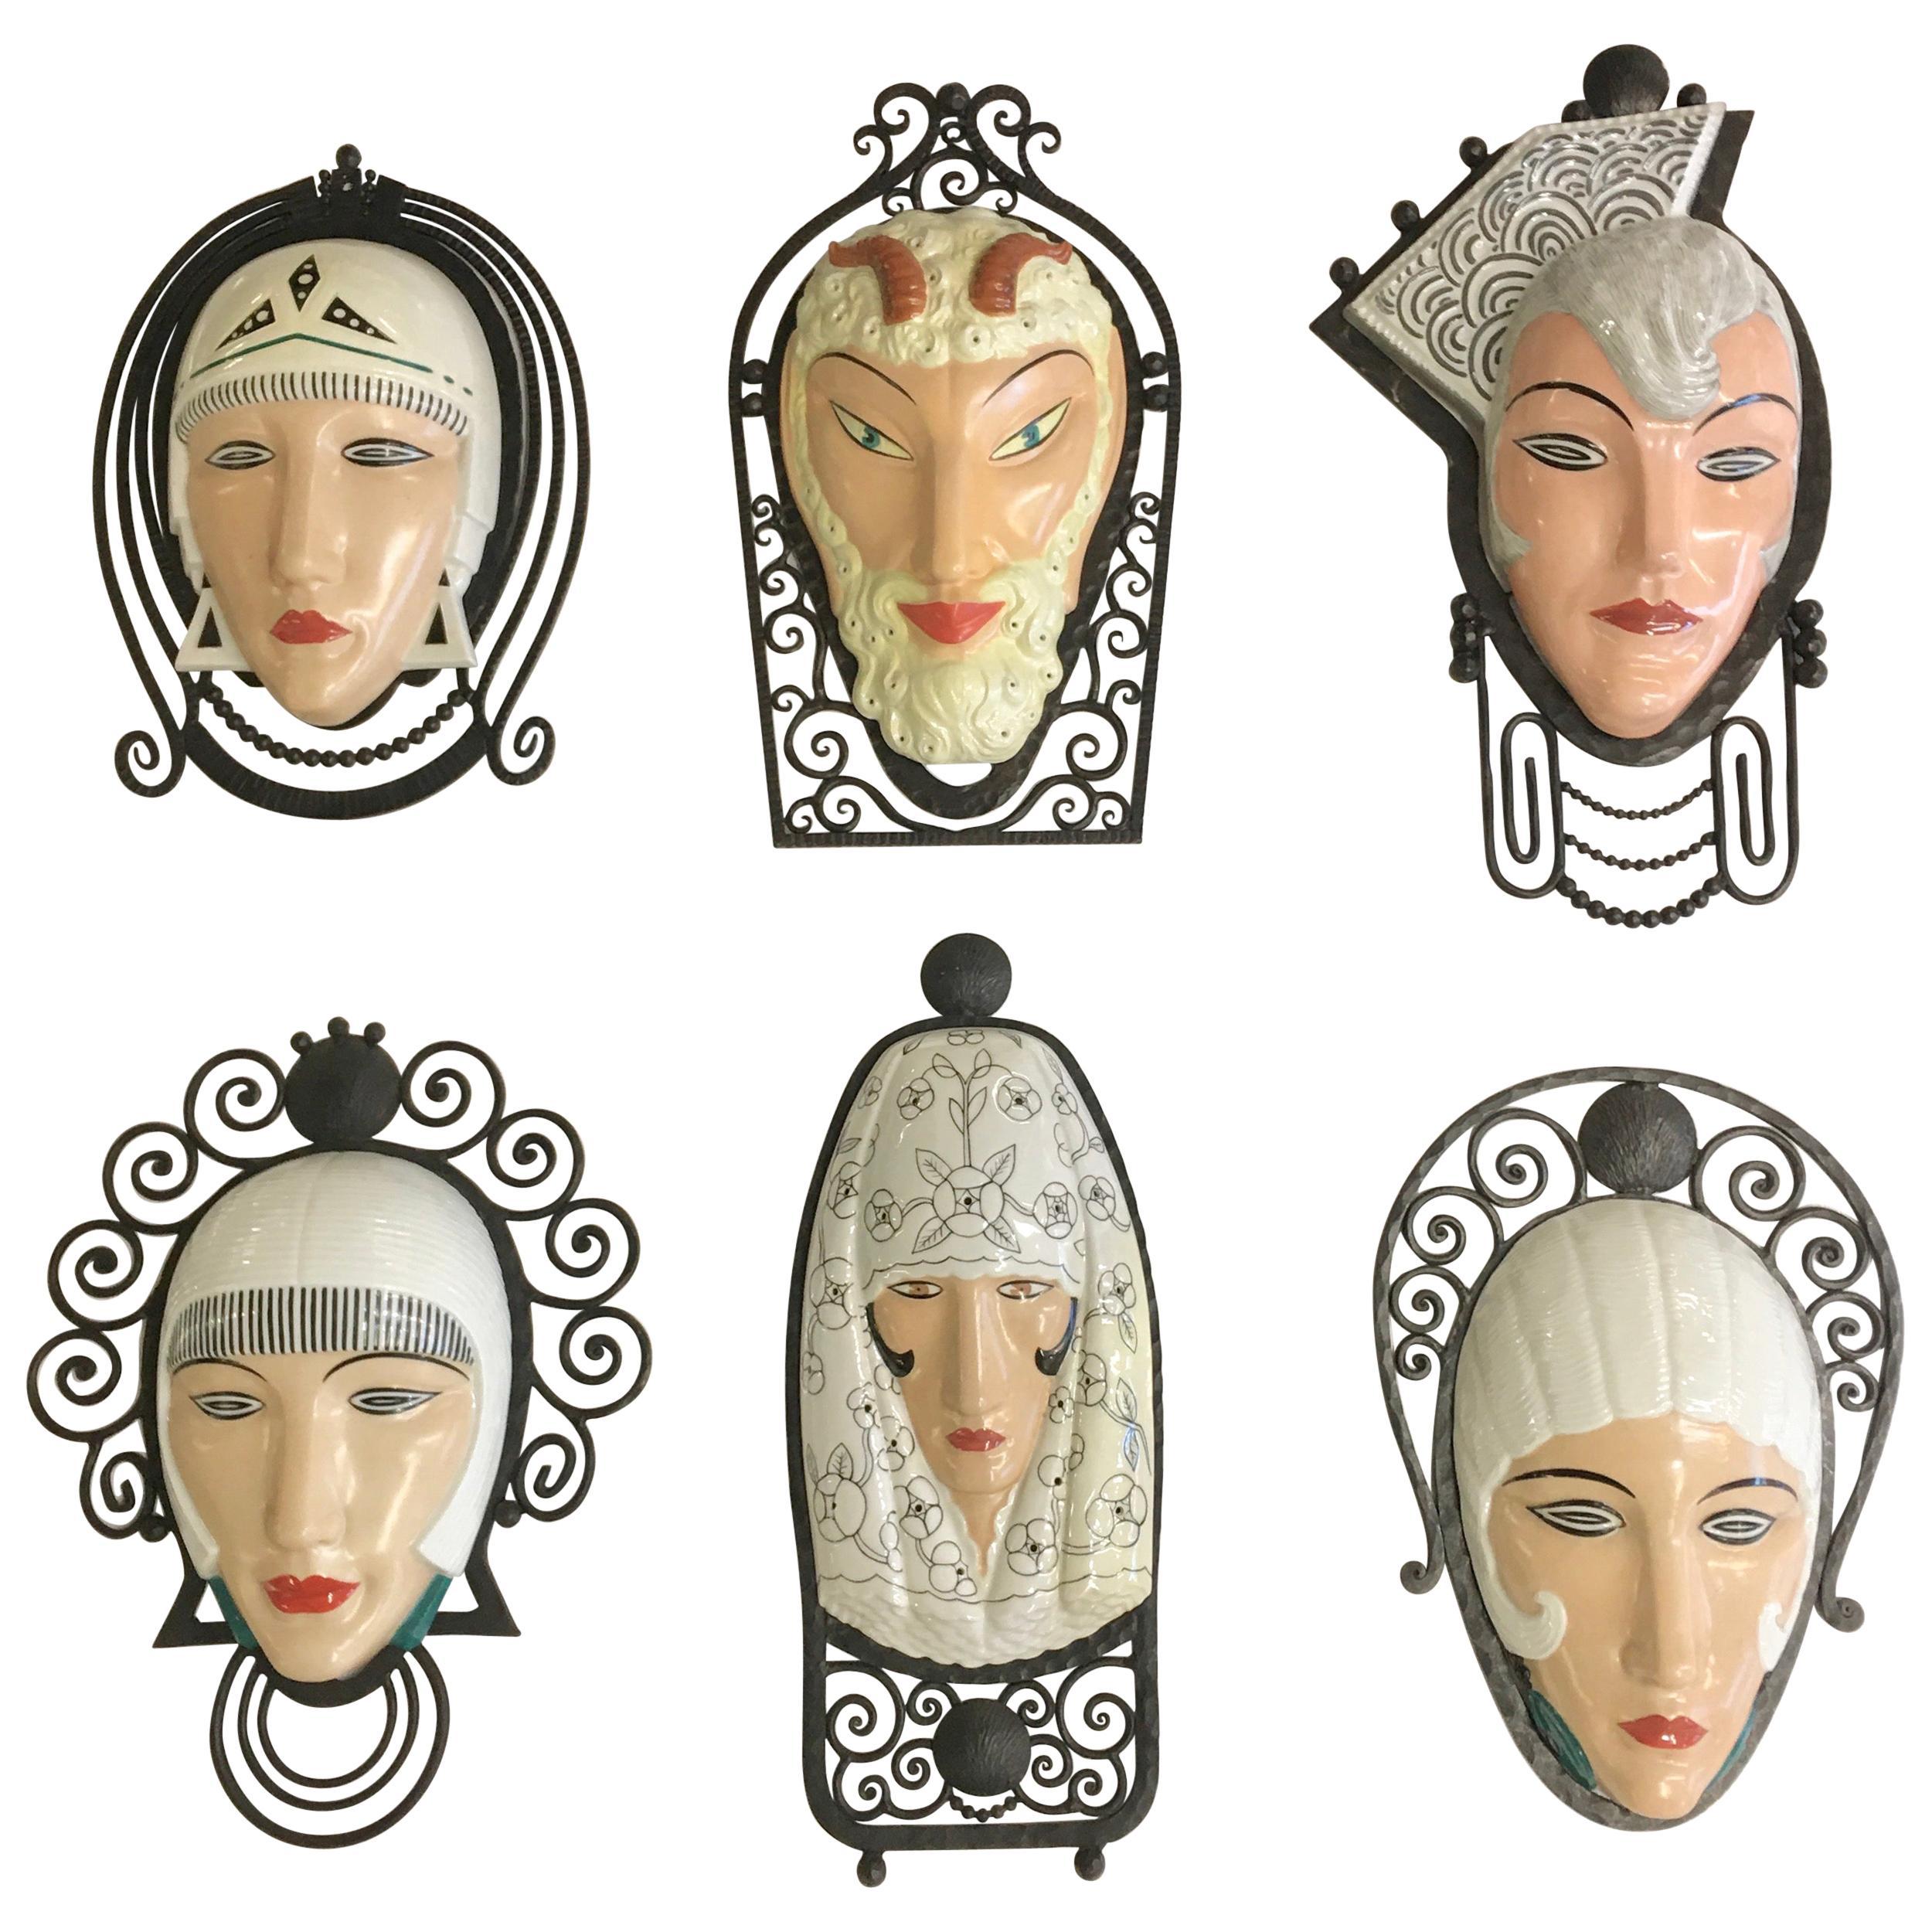 Exceedingly rare collection of seven (7) unique wall mounted porcelain masks mounted in fer forge frames, all signed M. Bever Paris, Made in France, circa 1925. 
The iron frames are stamped 'France' and were made to be electrified and illuminated